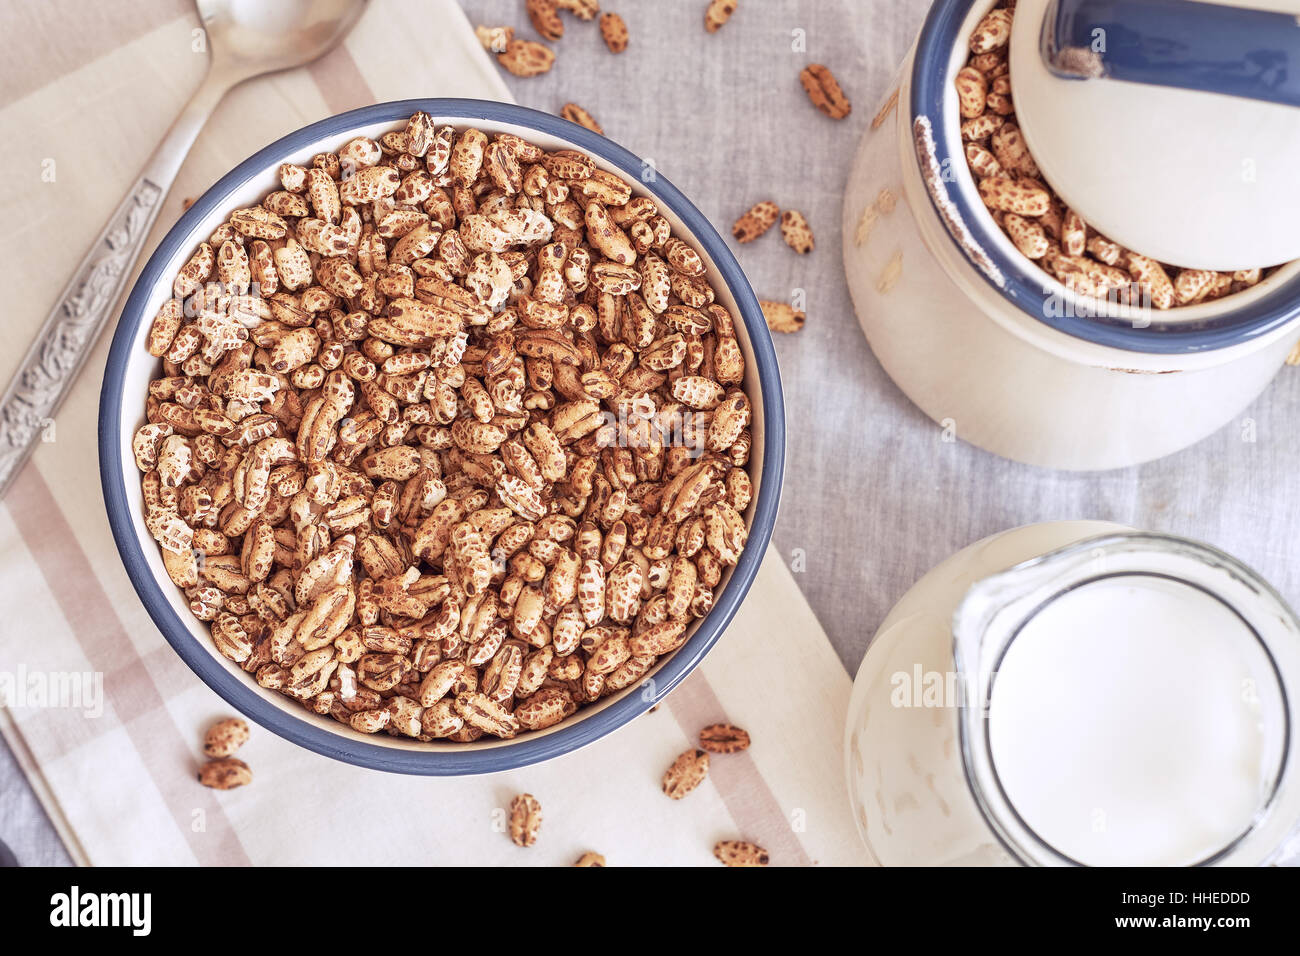 Puffed barley cereal in bowl with pitcher of milk. Top view Stock Photo